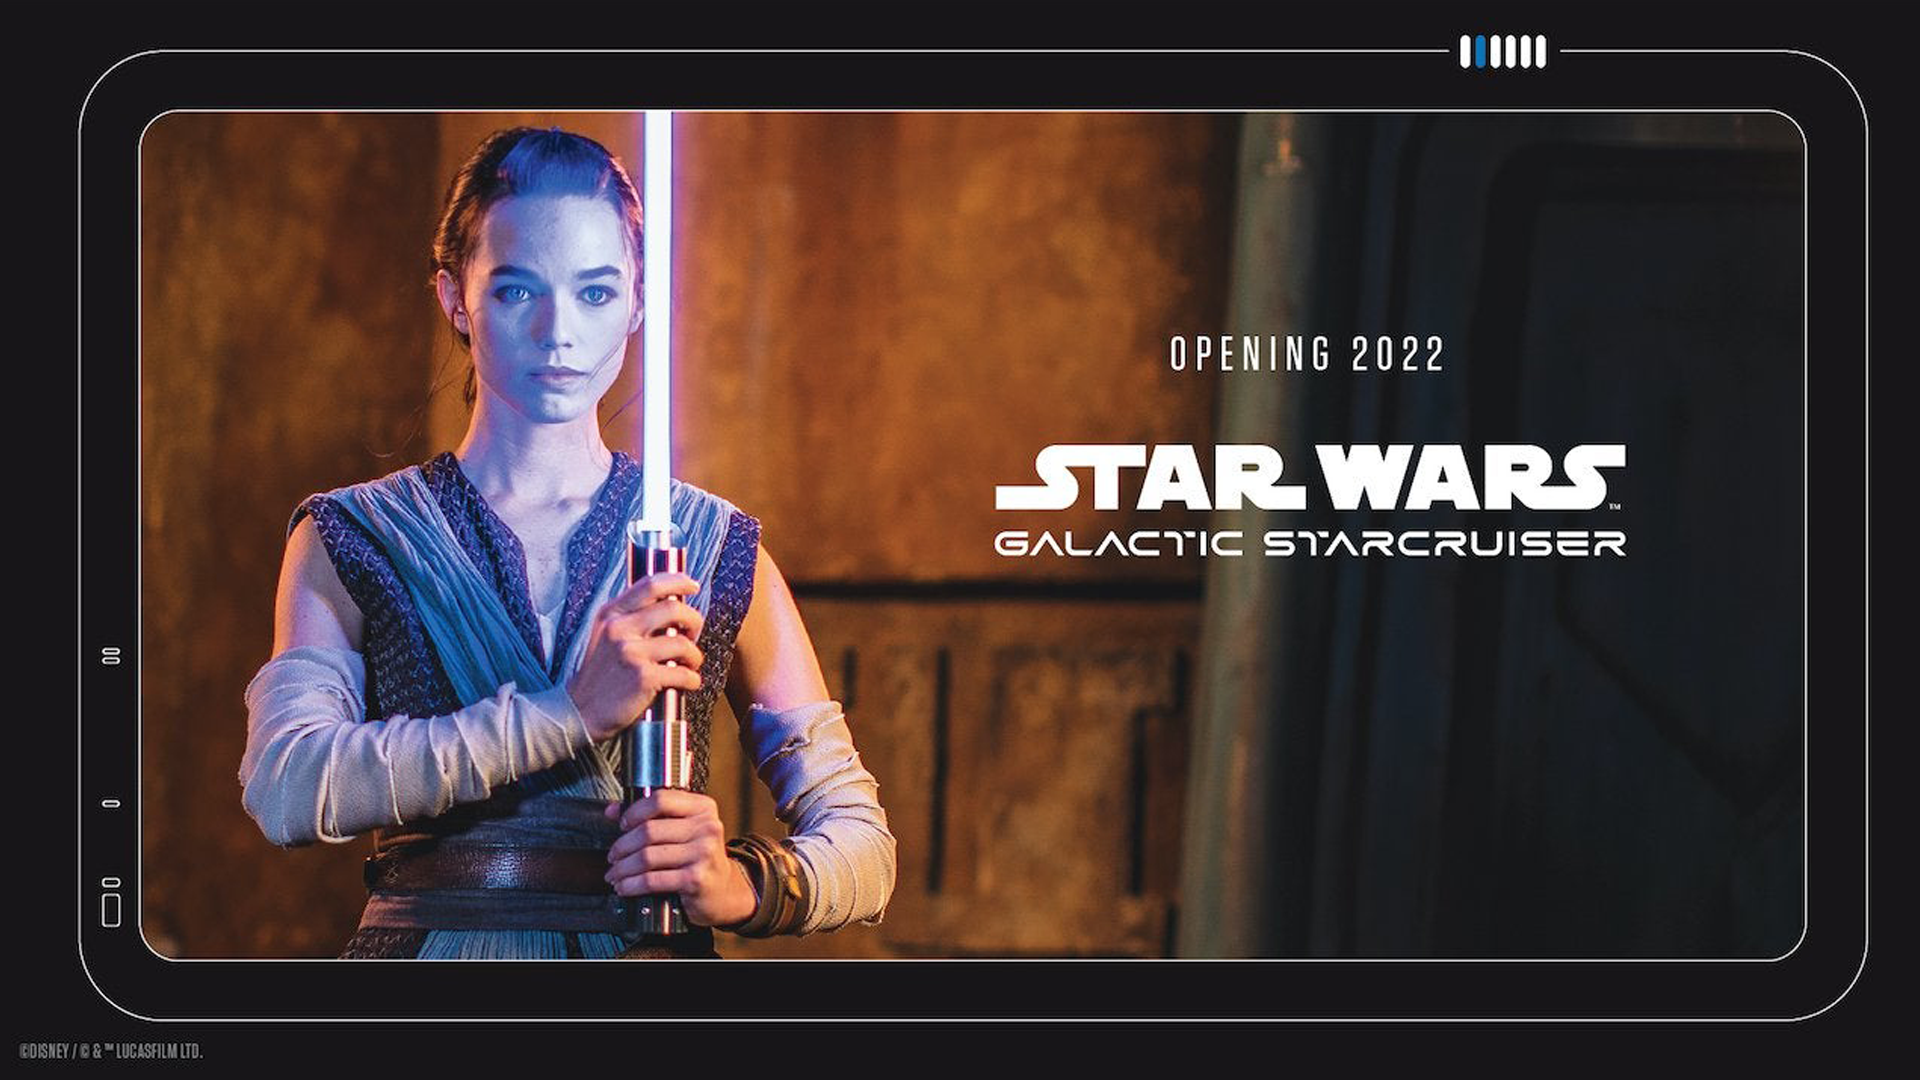 Glimpse Disney’s Unique “Real” Lightsaber at Smartly-known particular person Wars: Galactic Starcruiser in 2022